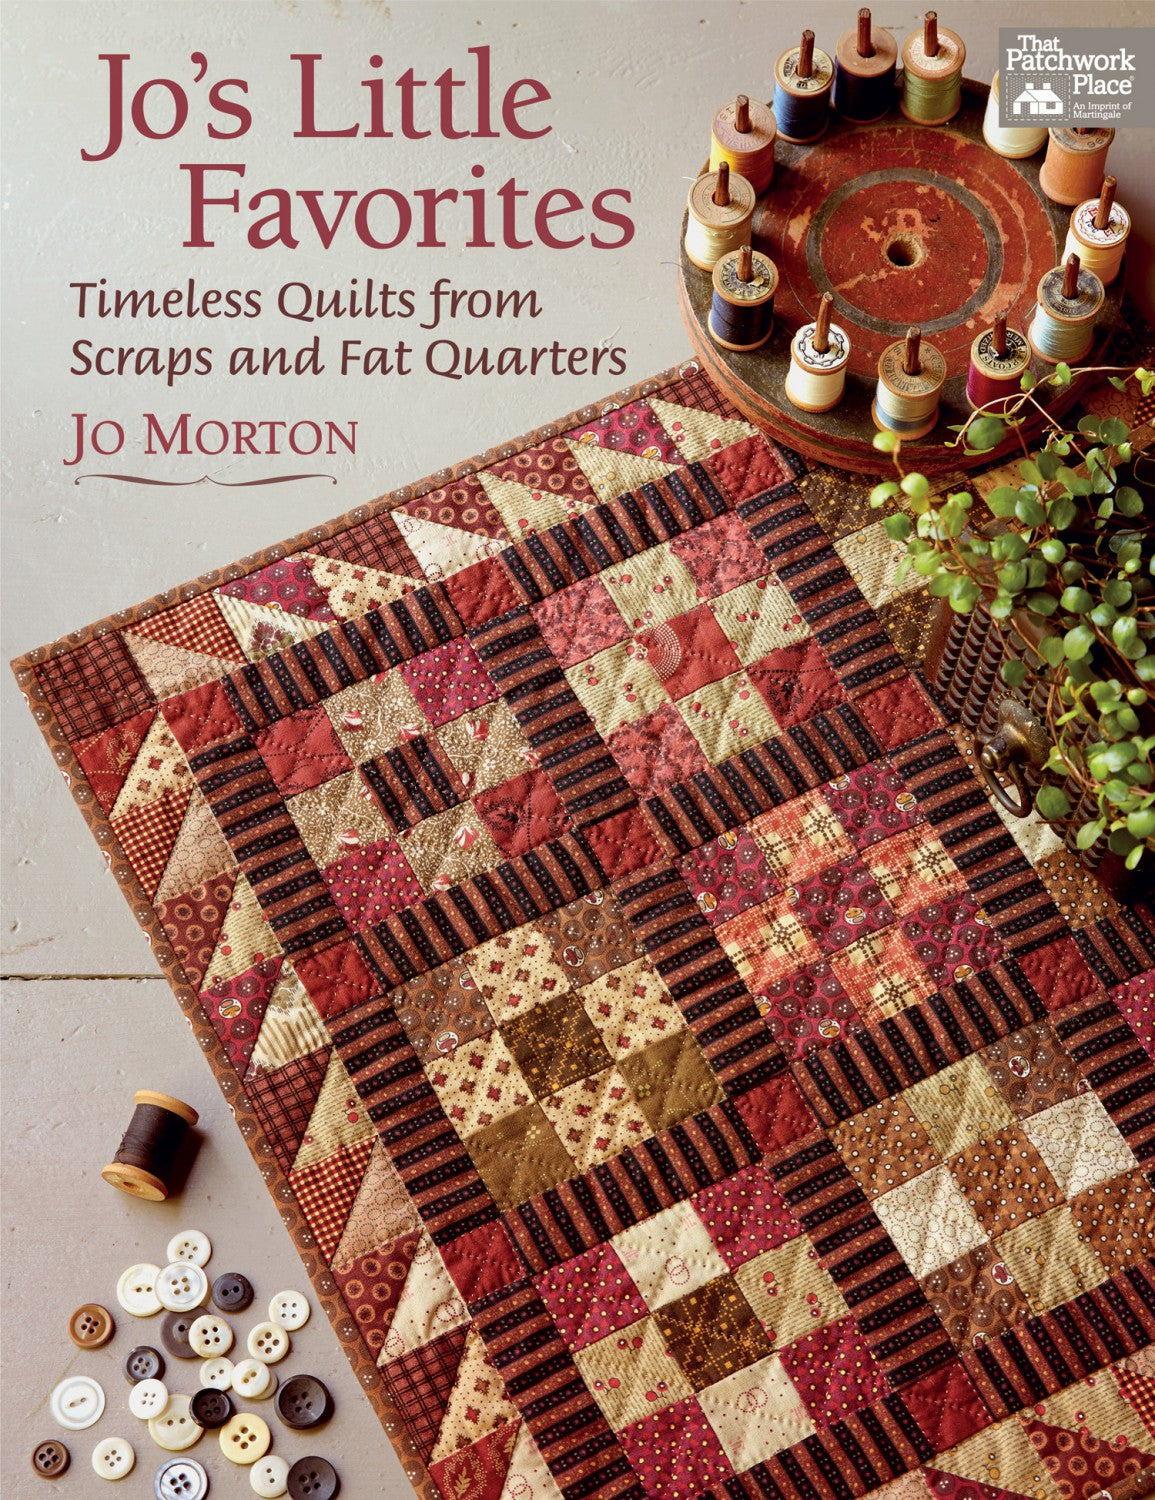 Jo's Little Favorites - Timeless Quilts from Scraps and Fat Quarters